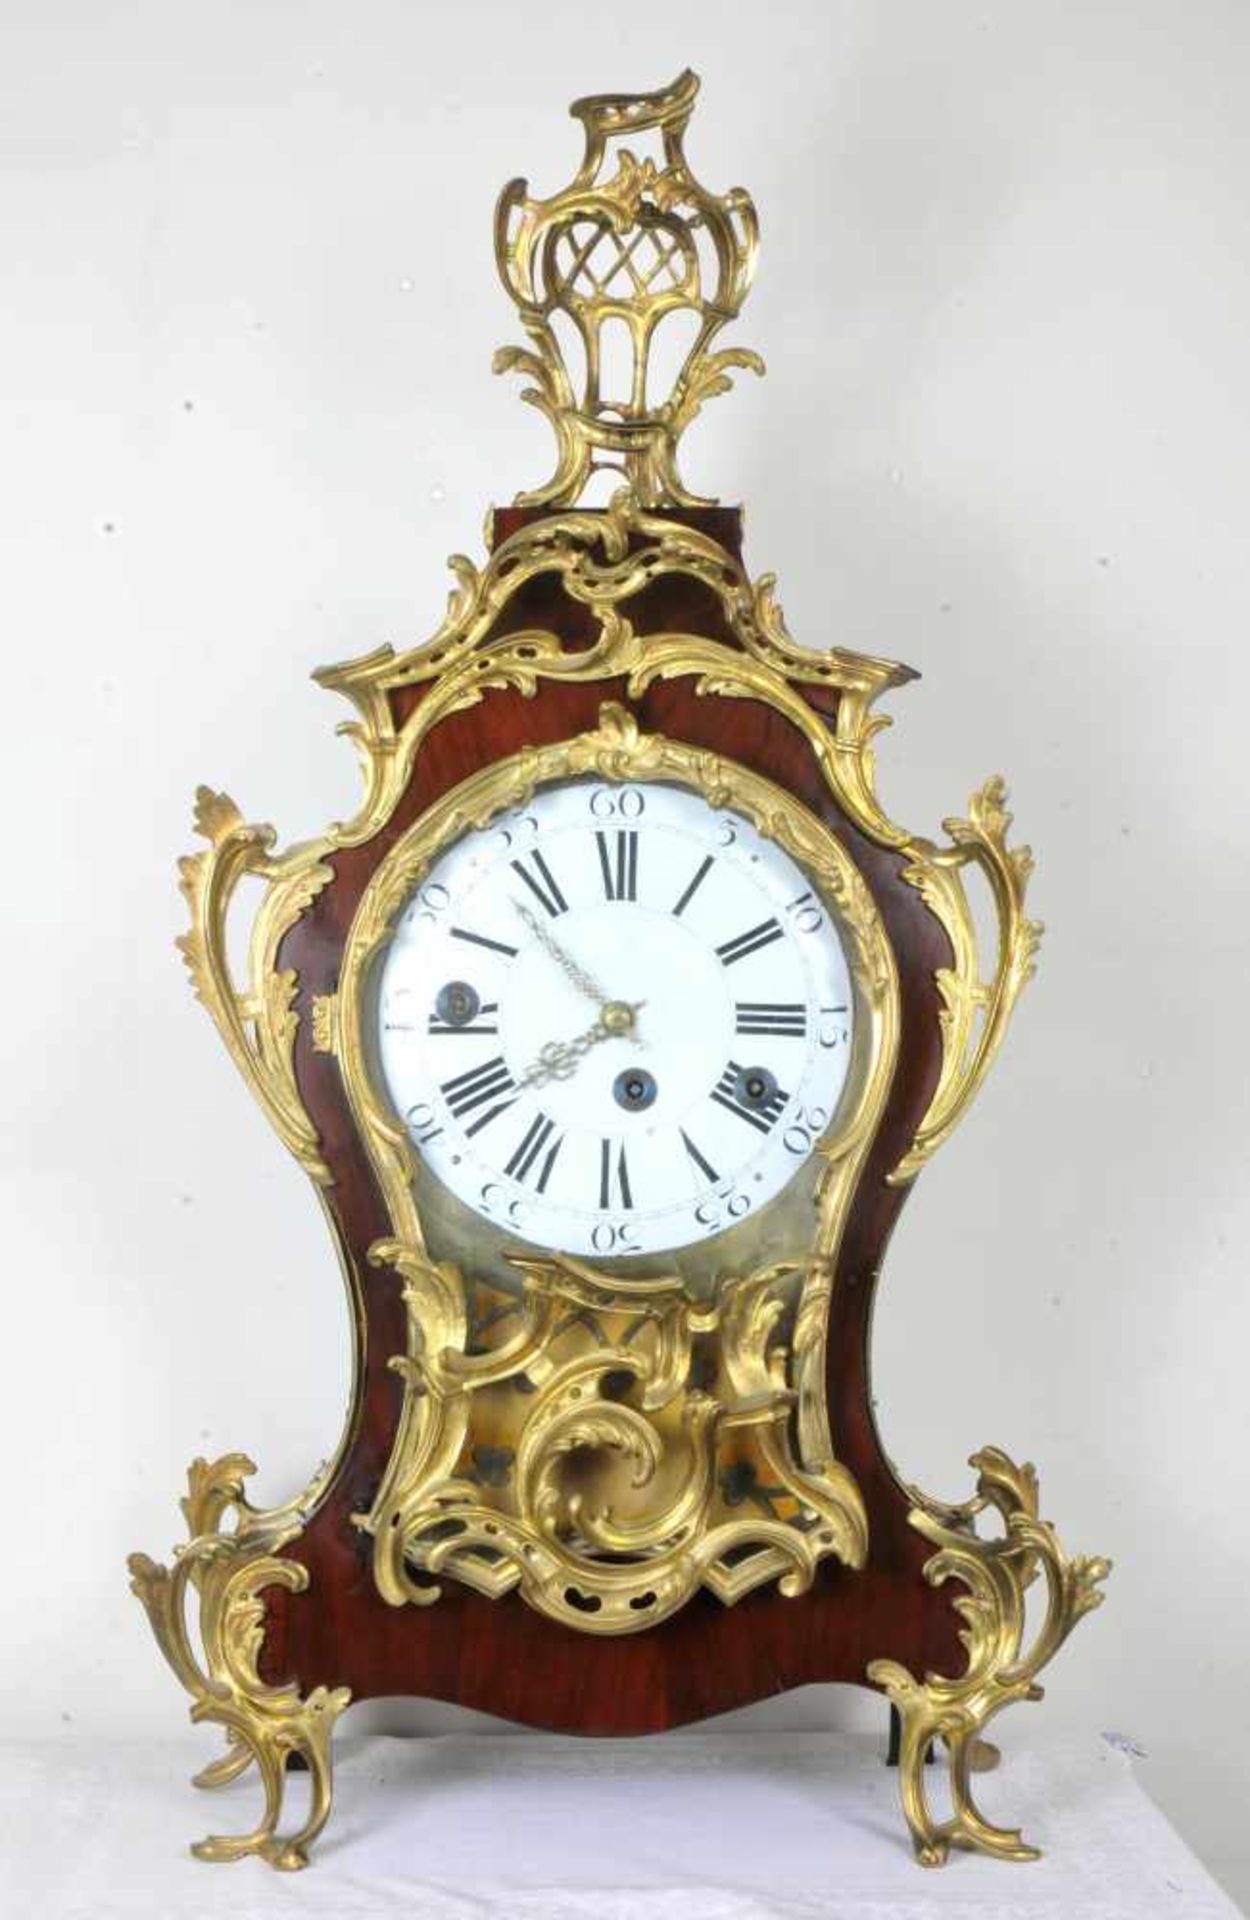 AN 18TH C. FRENCH/SWISS MUSICAL PIPE ORGAN AND QUARTER STRIKING MANTEL CLOCK BY JAQUET DROZ, LA